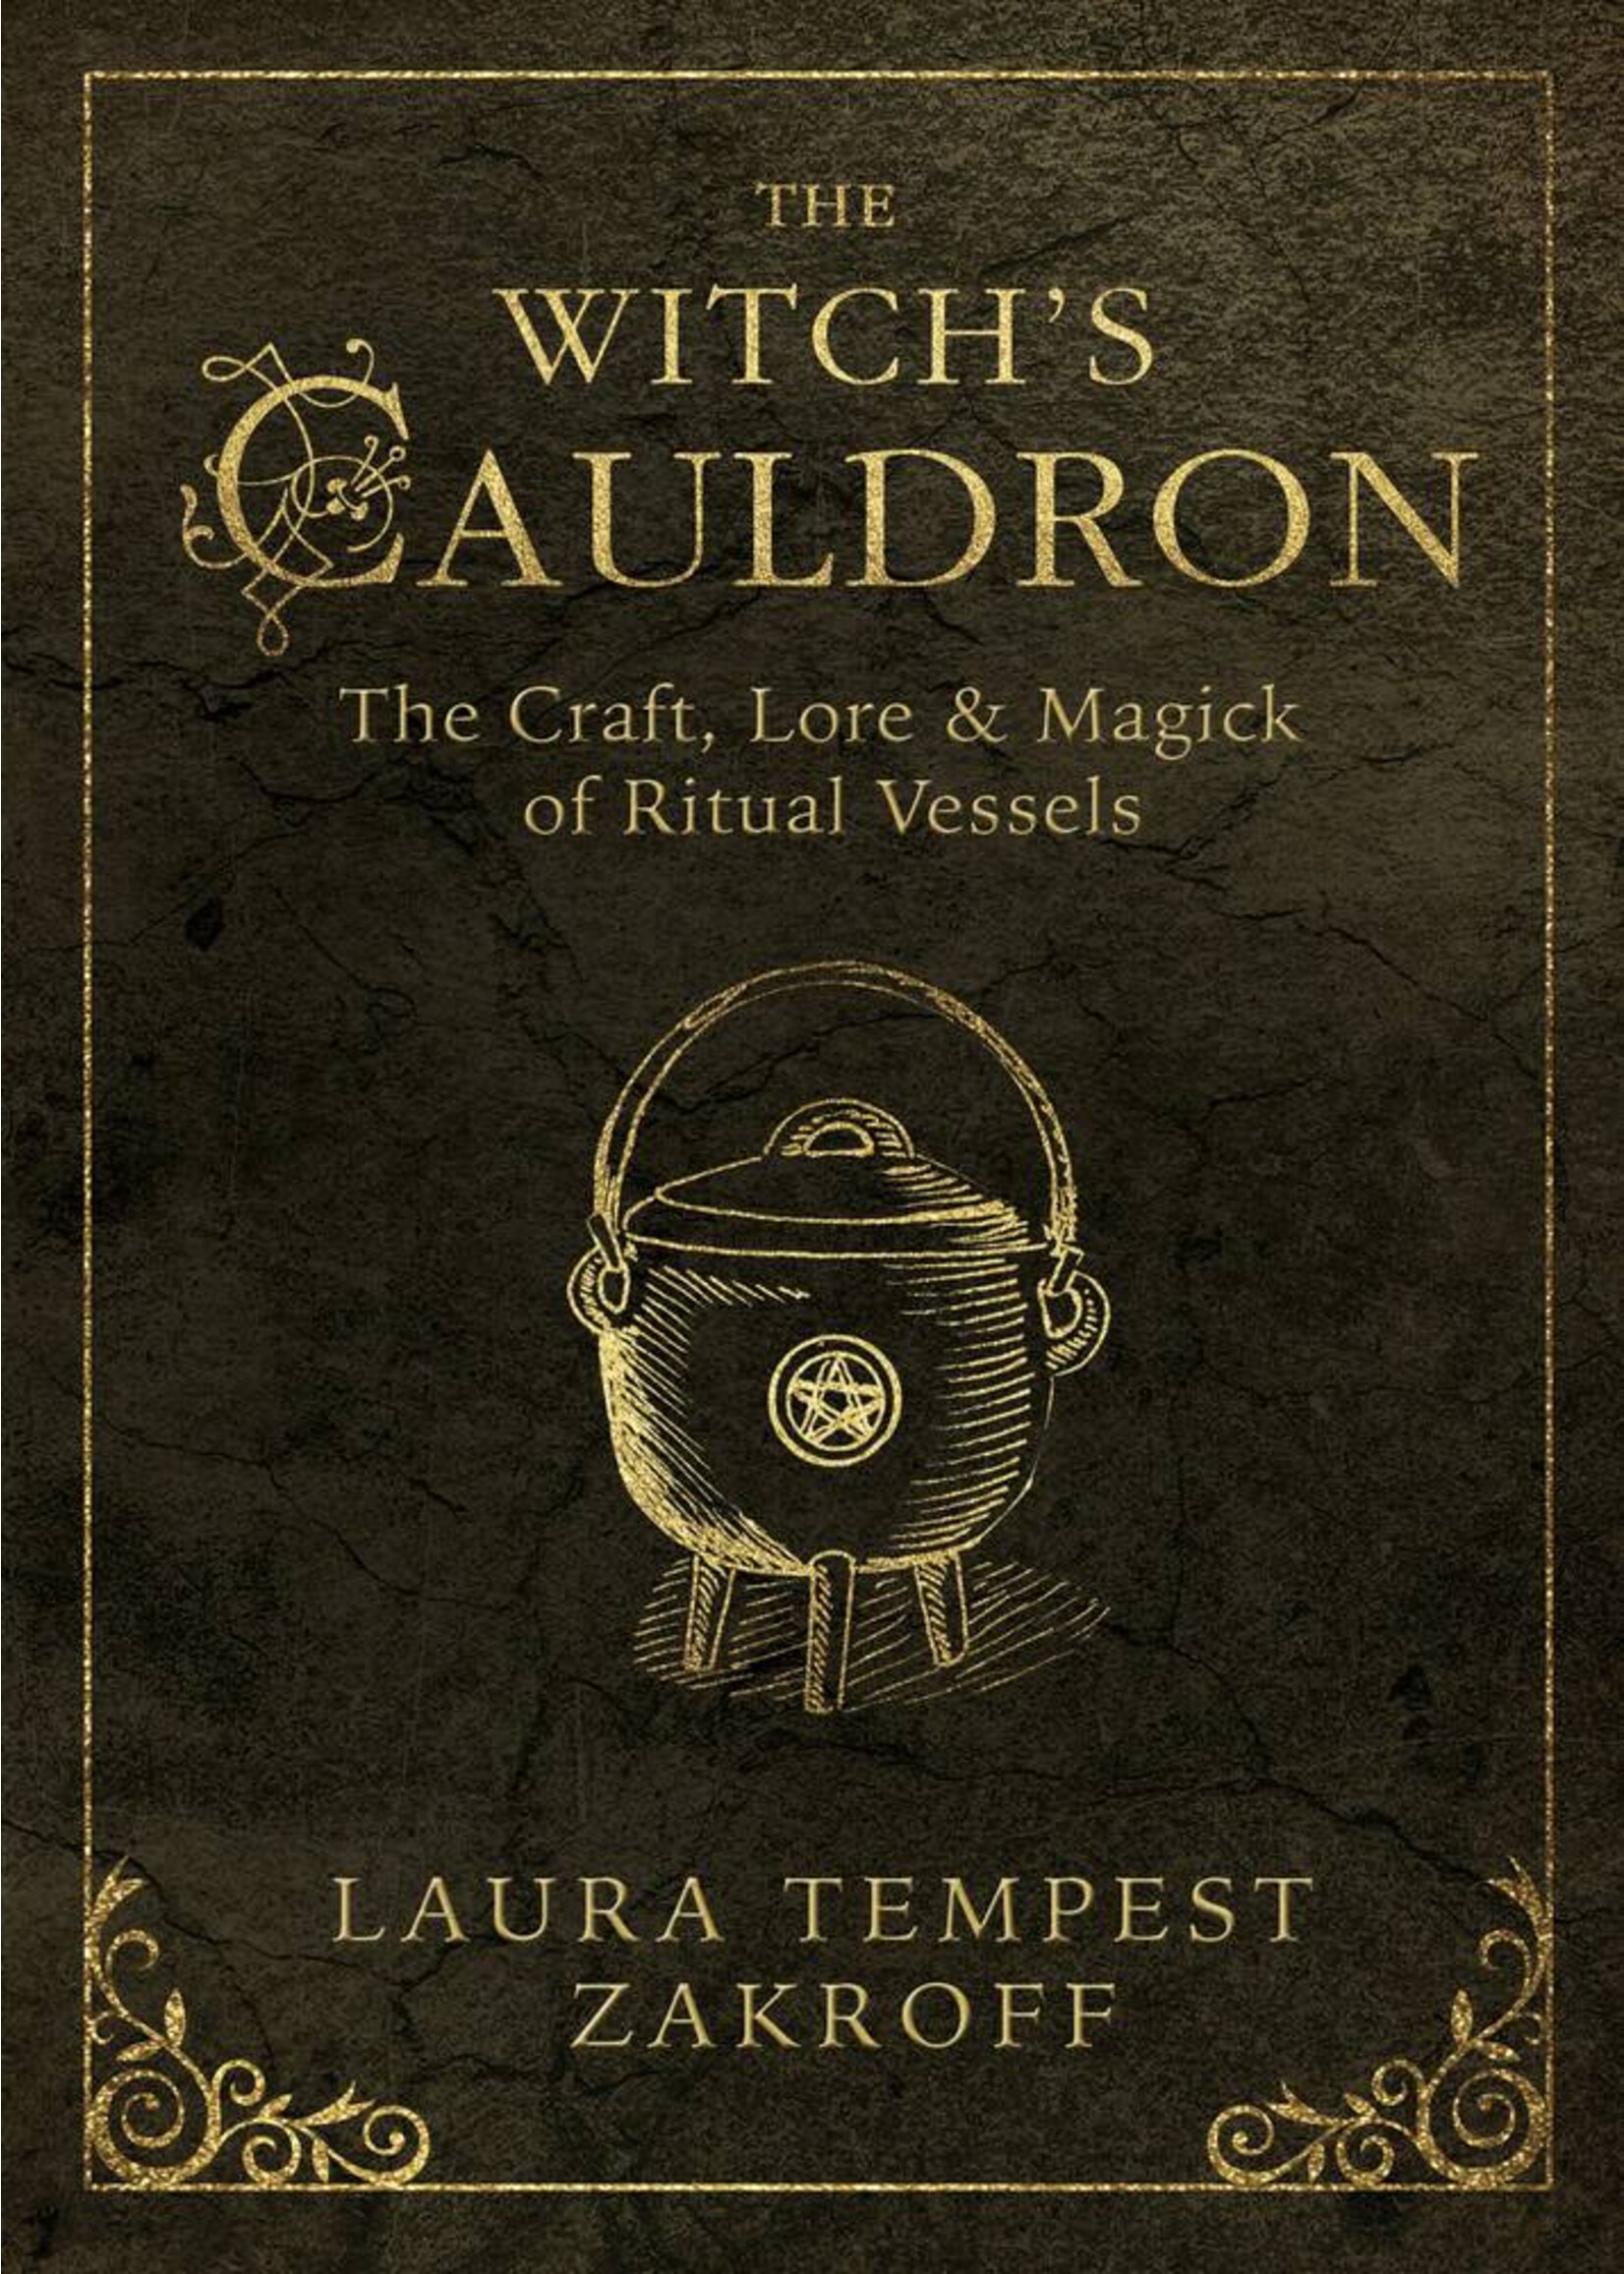 The Witch's Cauldron by Laura Tempest Zakroff